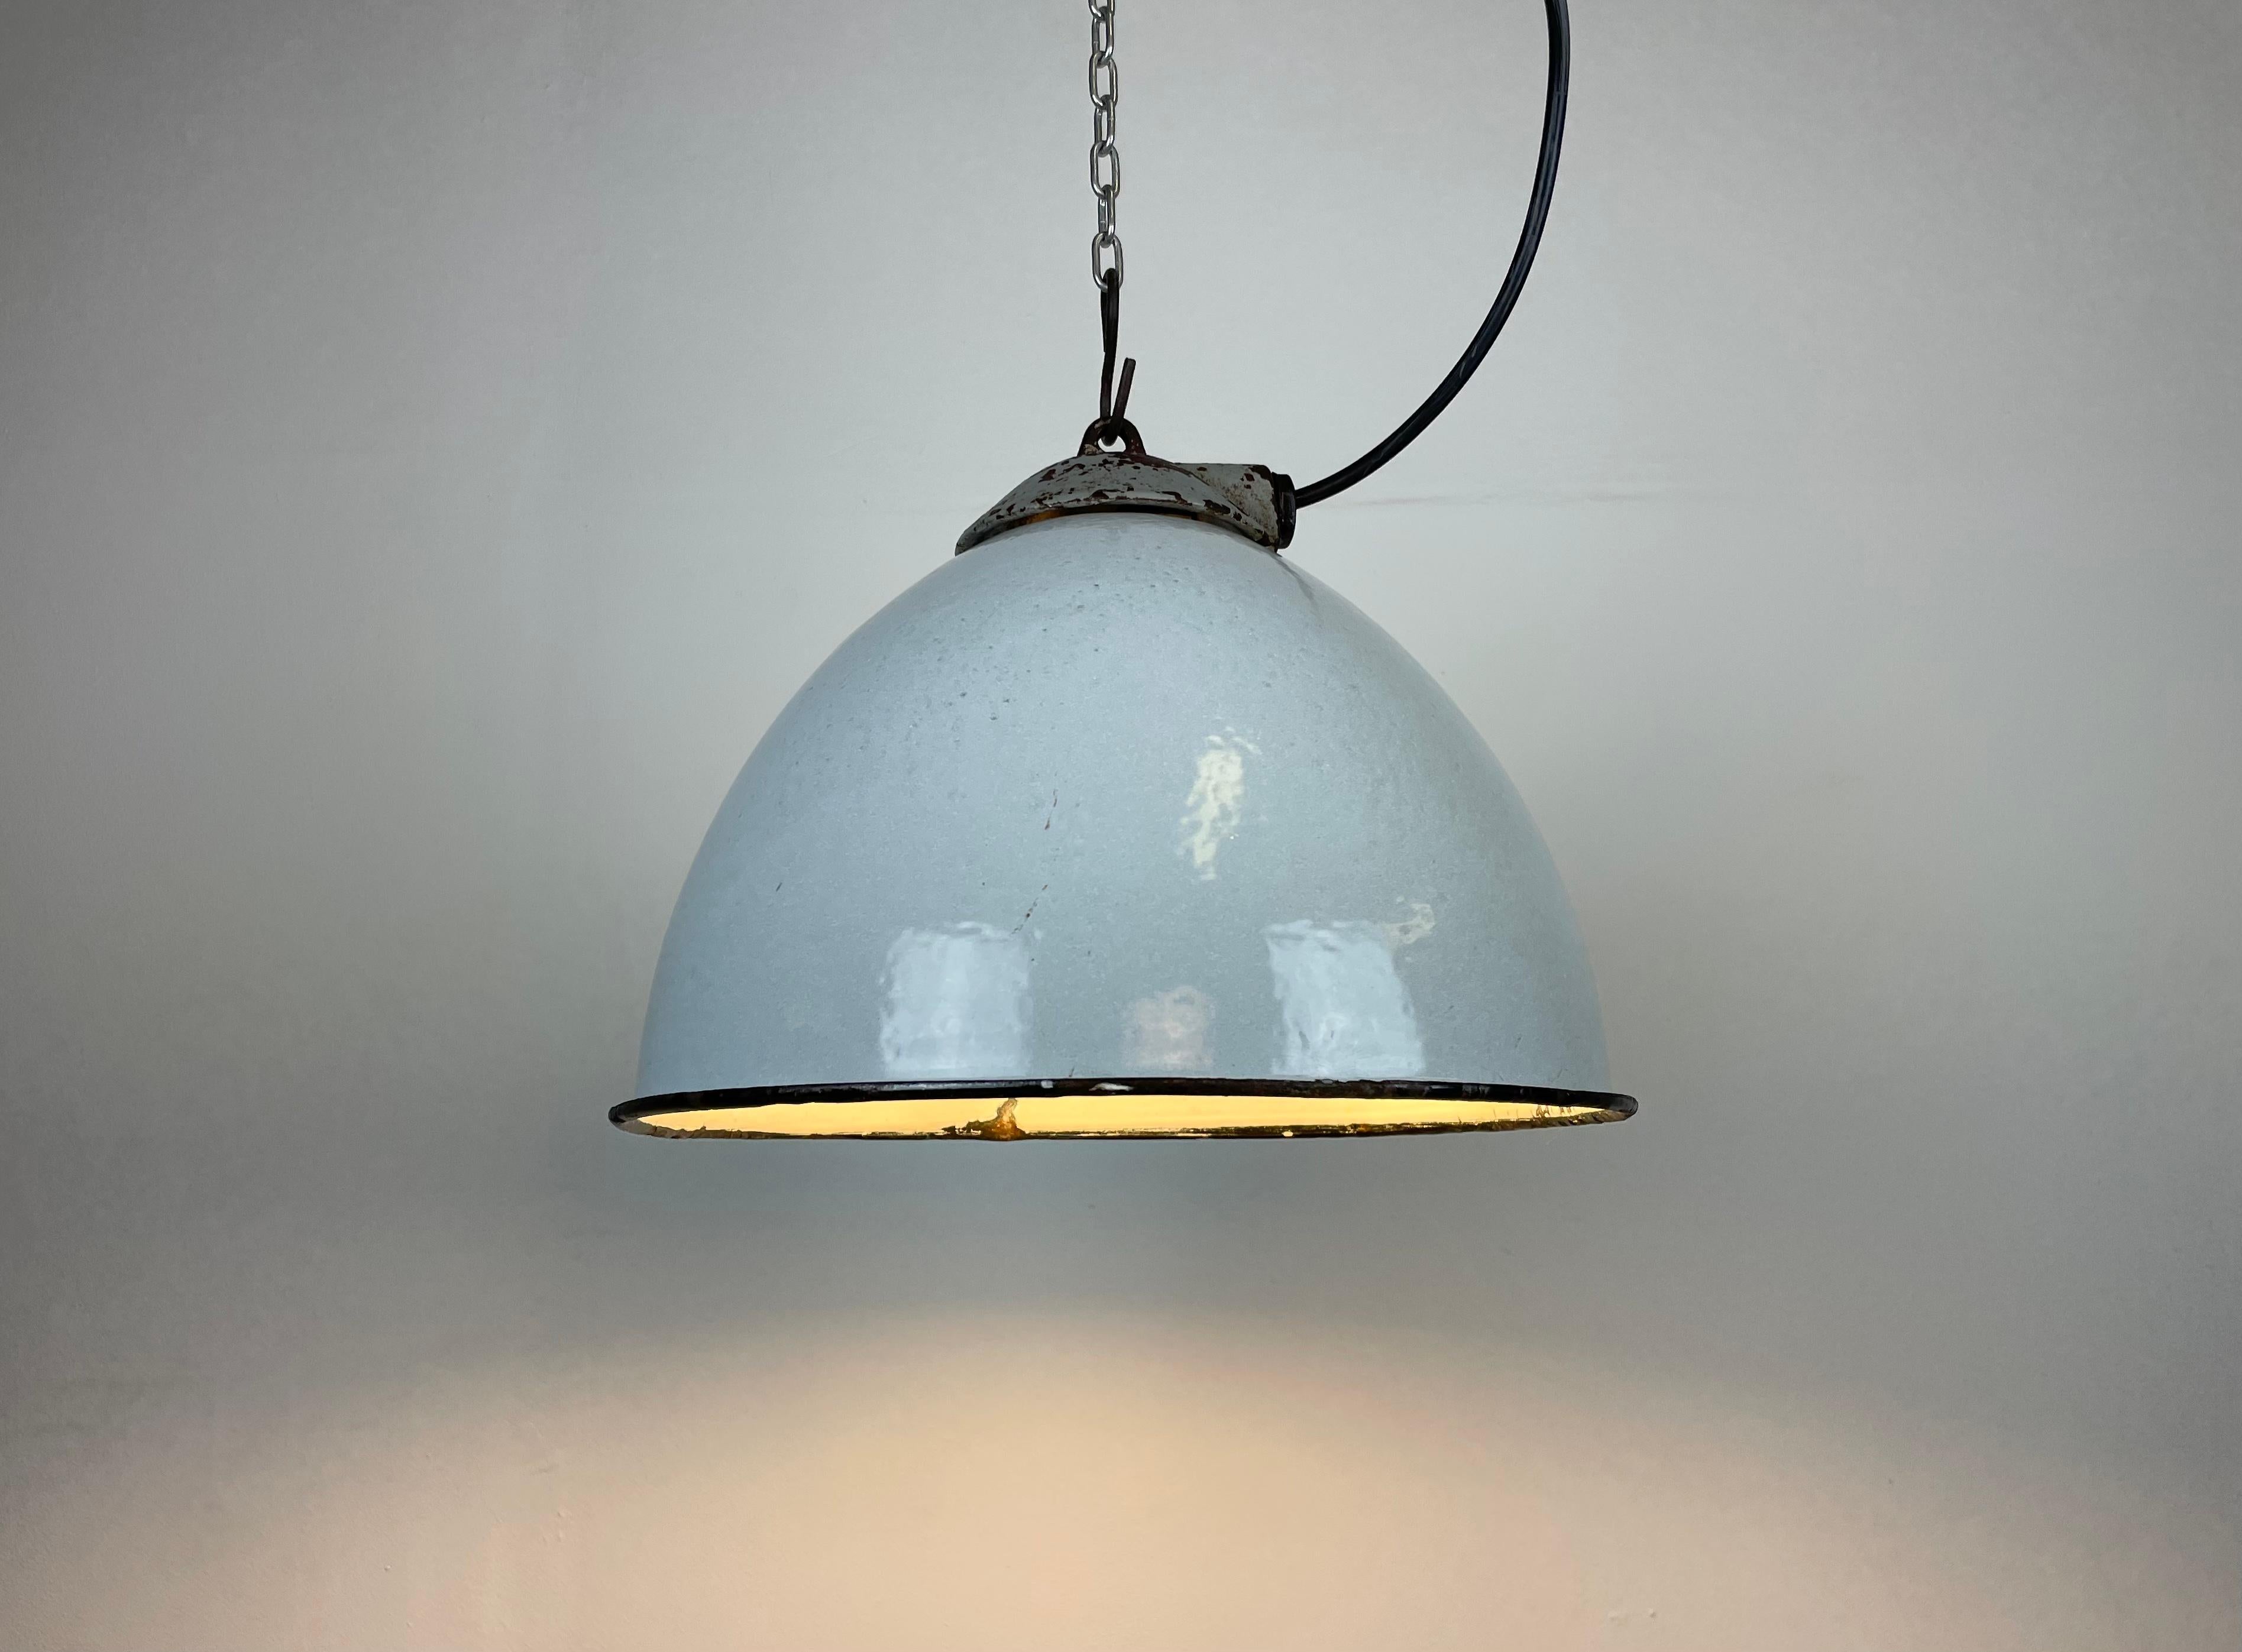 Industrial Grey Enamel Factory Lamp with Cast Iron Top from Zaos, 1960s For Sale 4